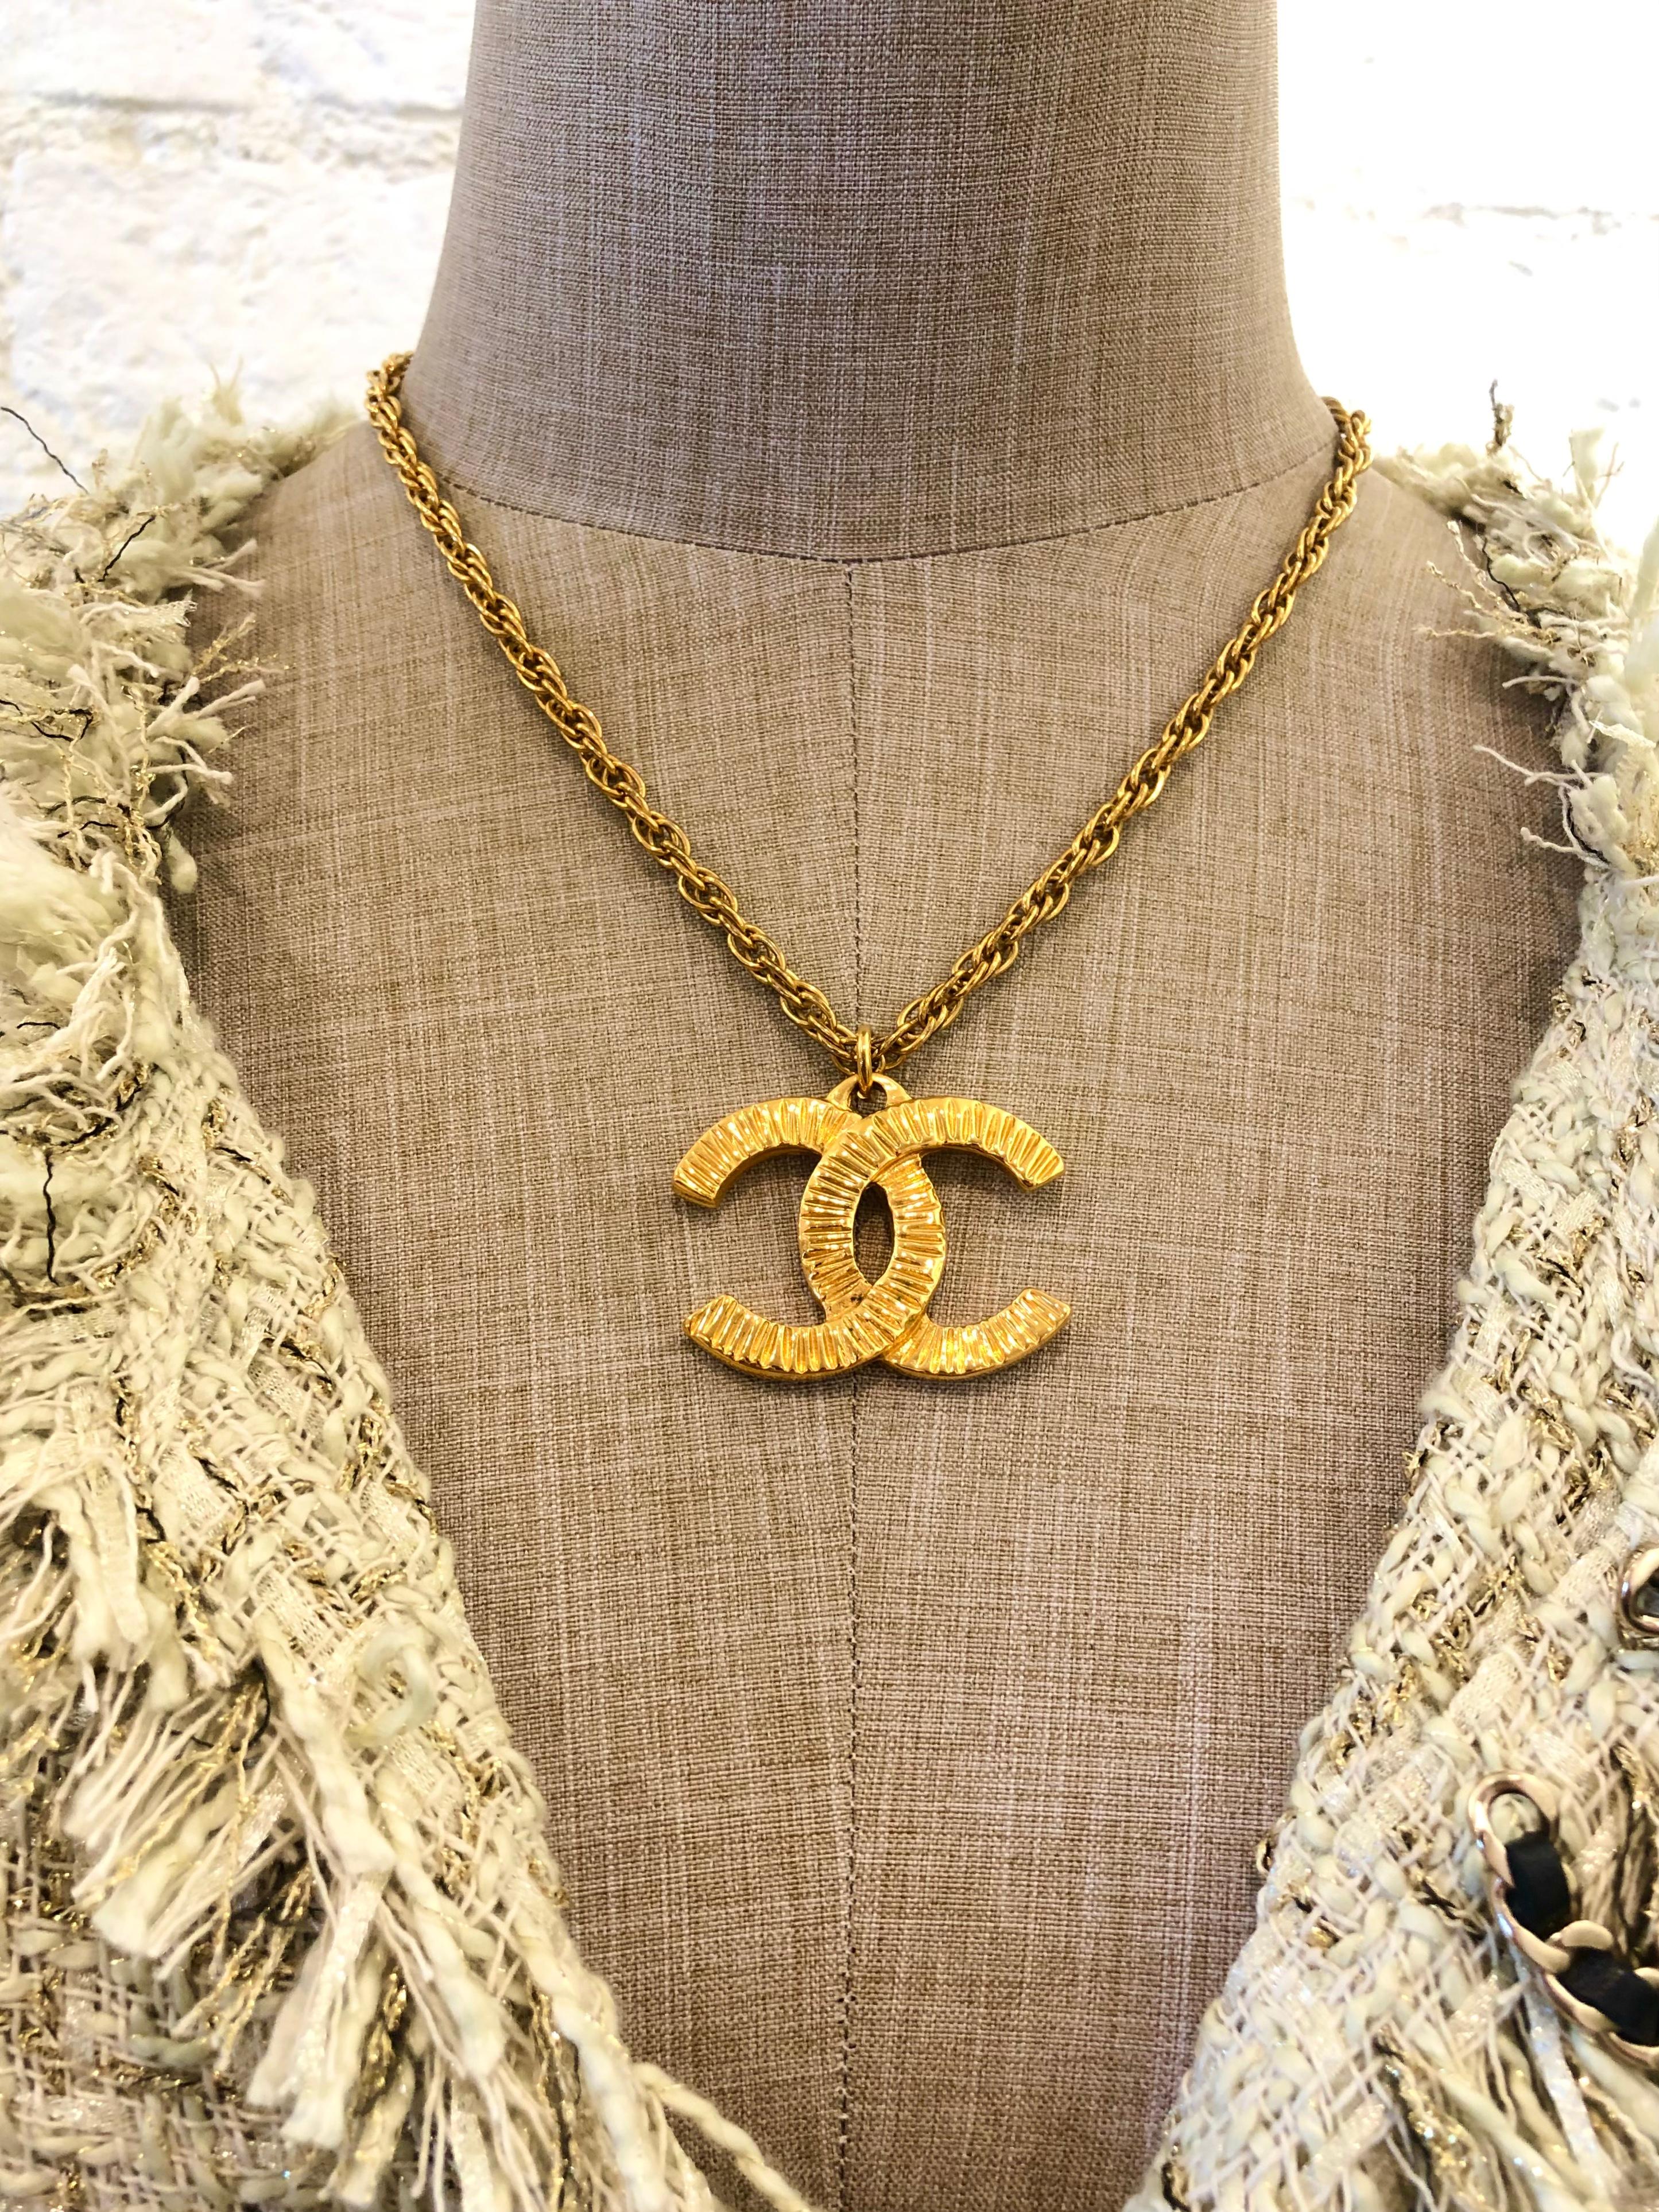 1993 Vintage CHANEL Gold Toned CC Charm Short Chain Necklace For Sale 1